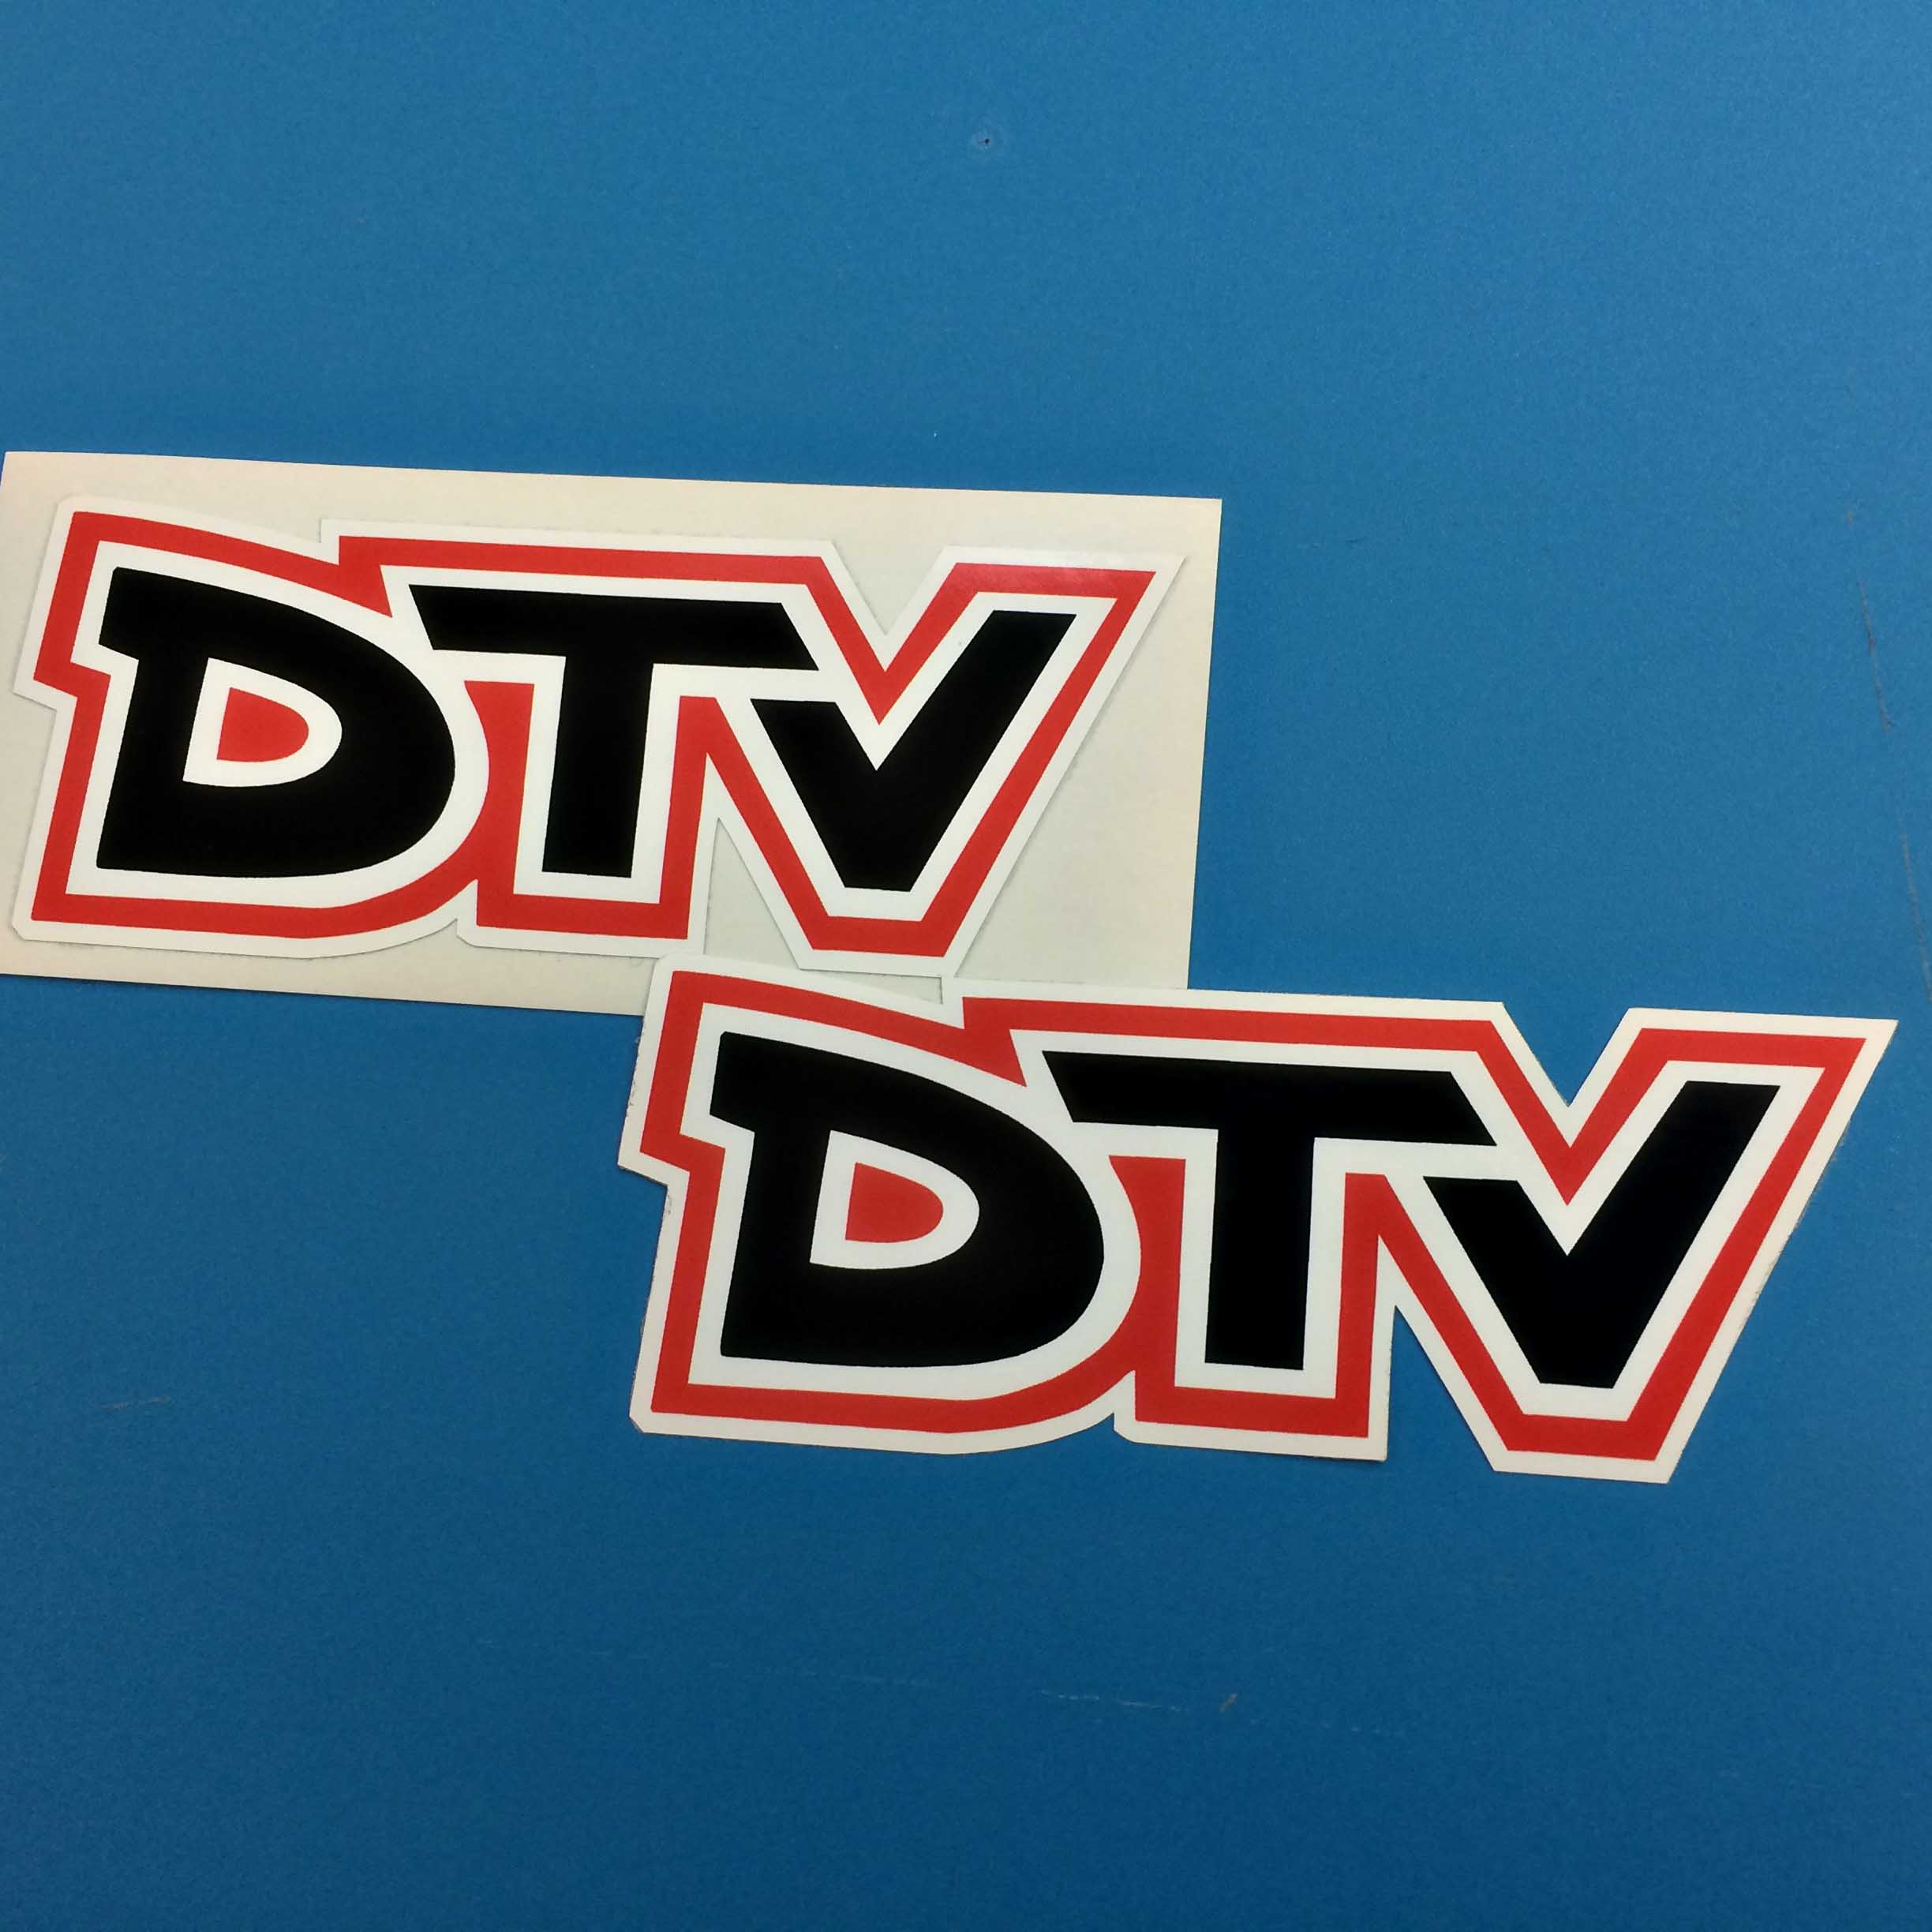 DTV bold lettering in black. Letters are edged in white and red.